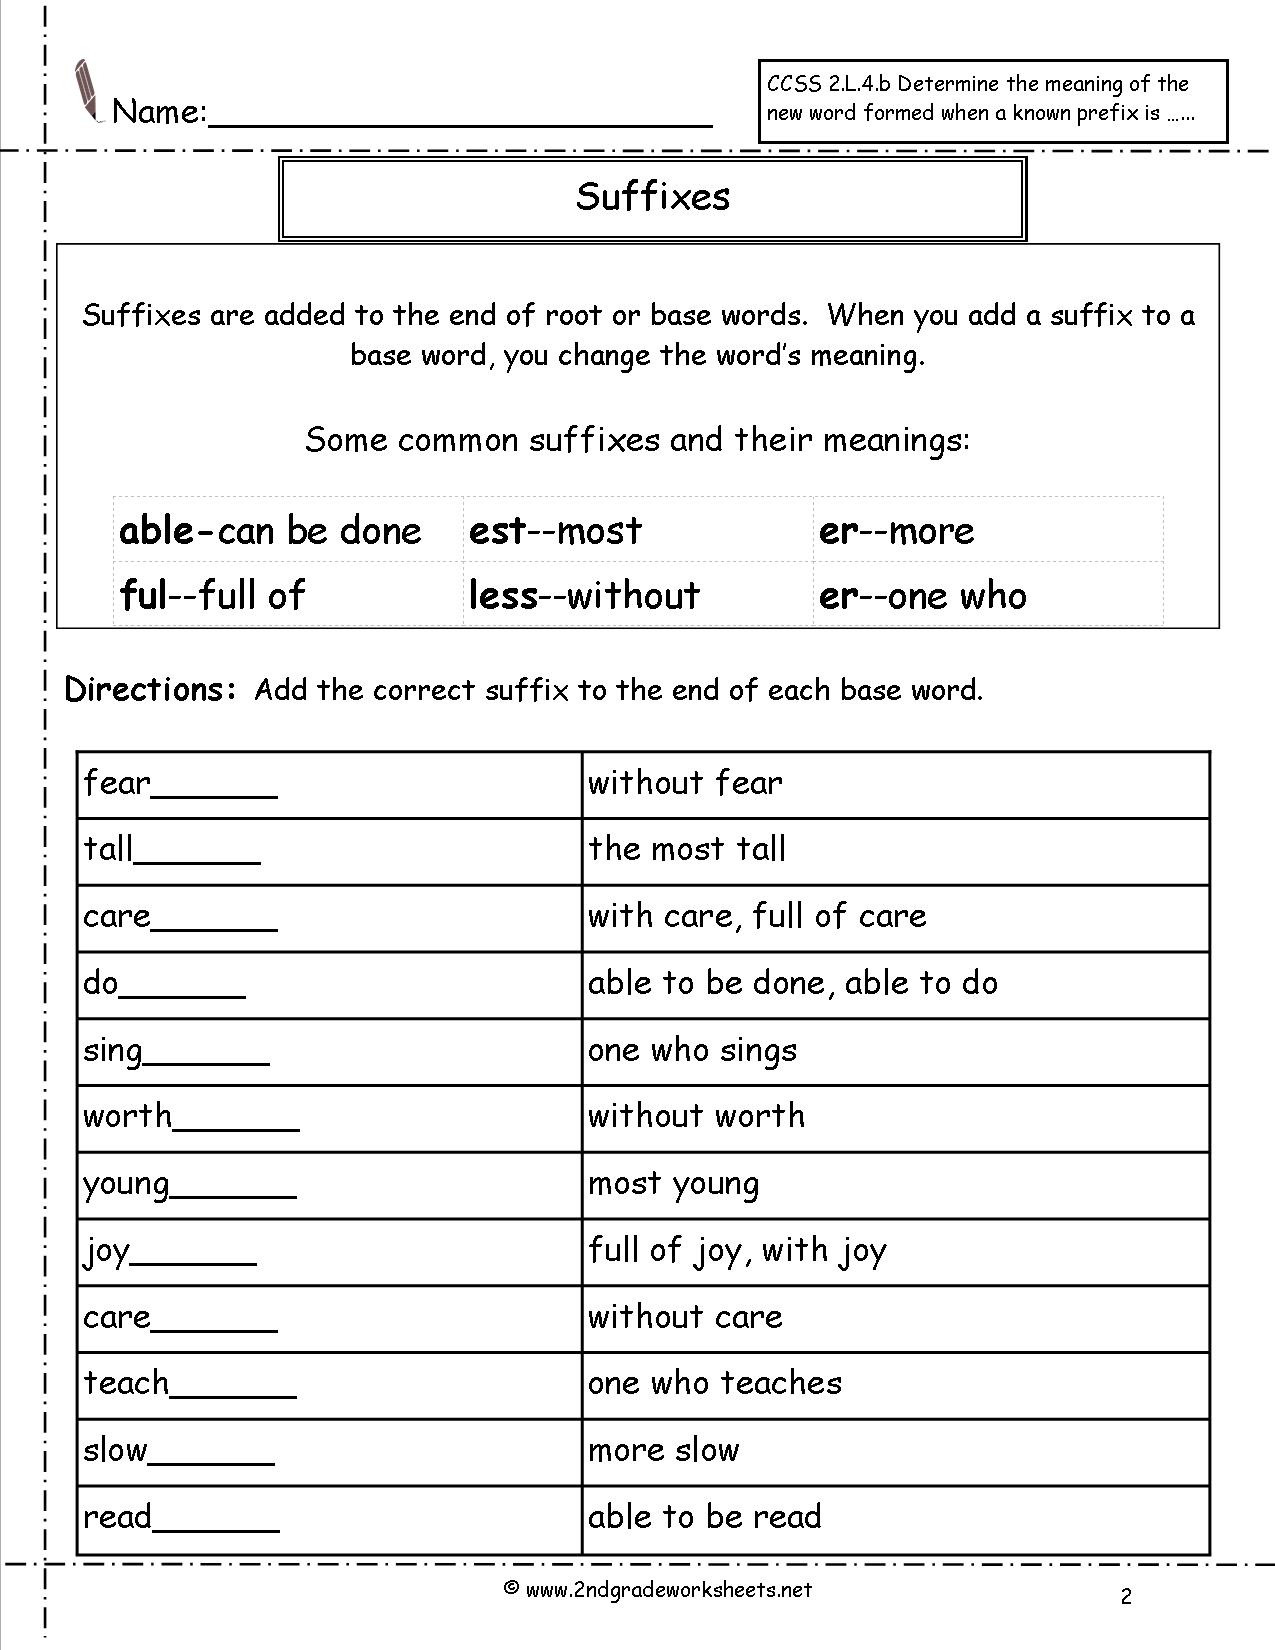 Free Printable Worksheets On Suffixes For Grade 2